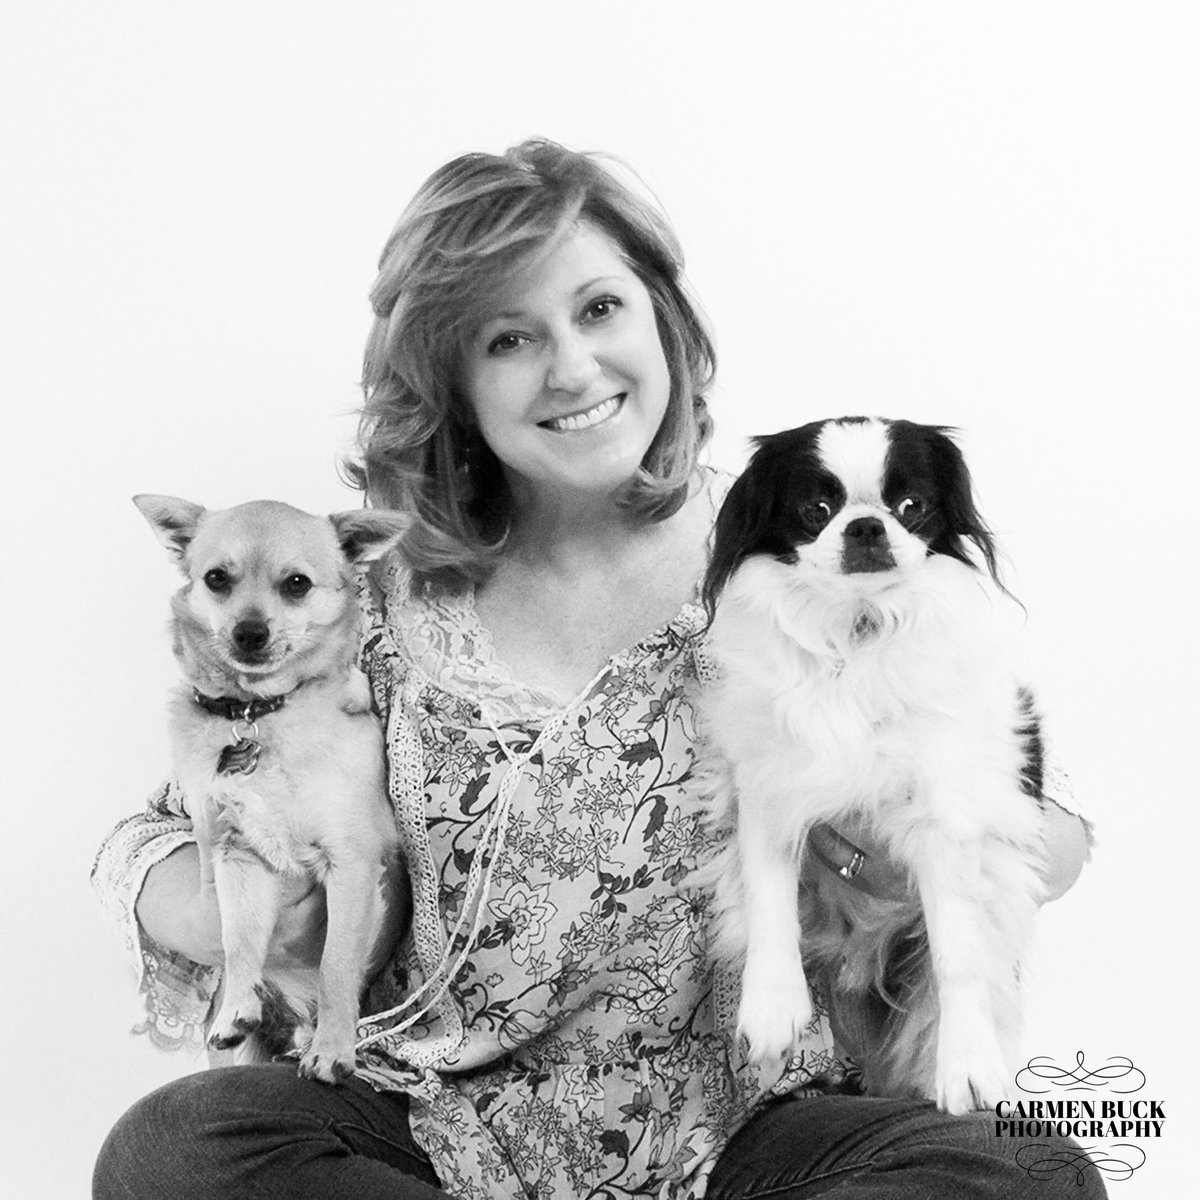 They were happy-just can't tell. 😀   #RoundRockPhotographer- #petandfamilyphotography  ow.ly/yul2309OTmq